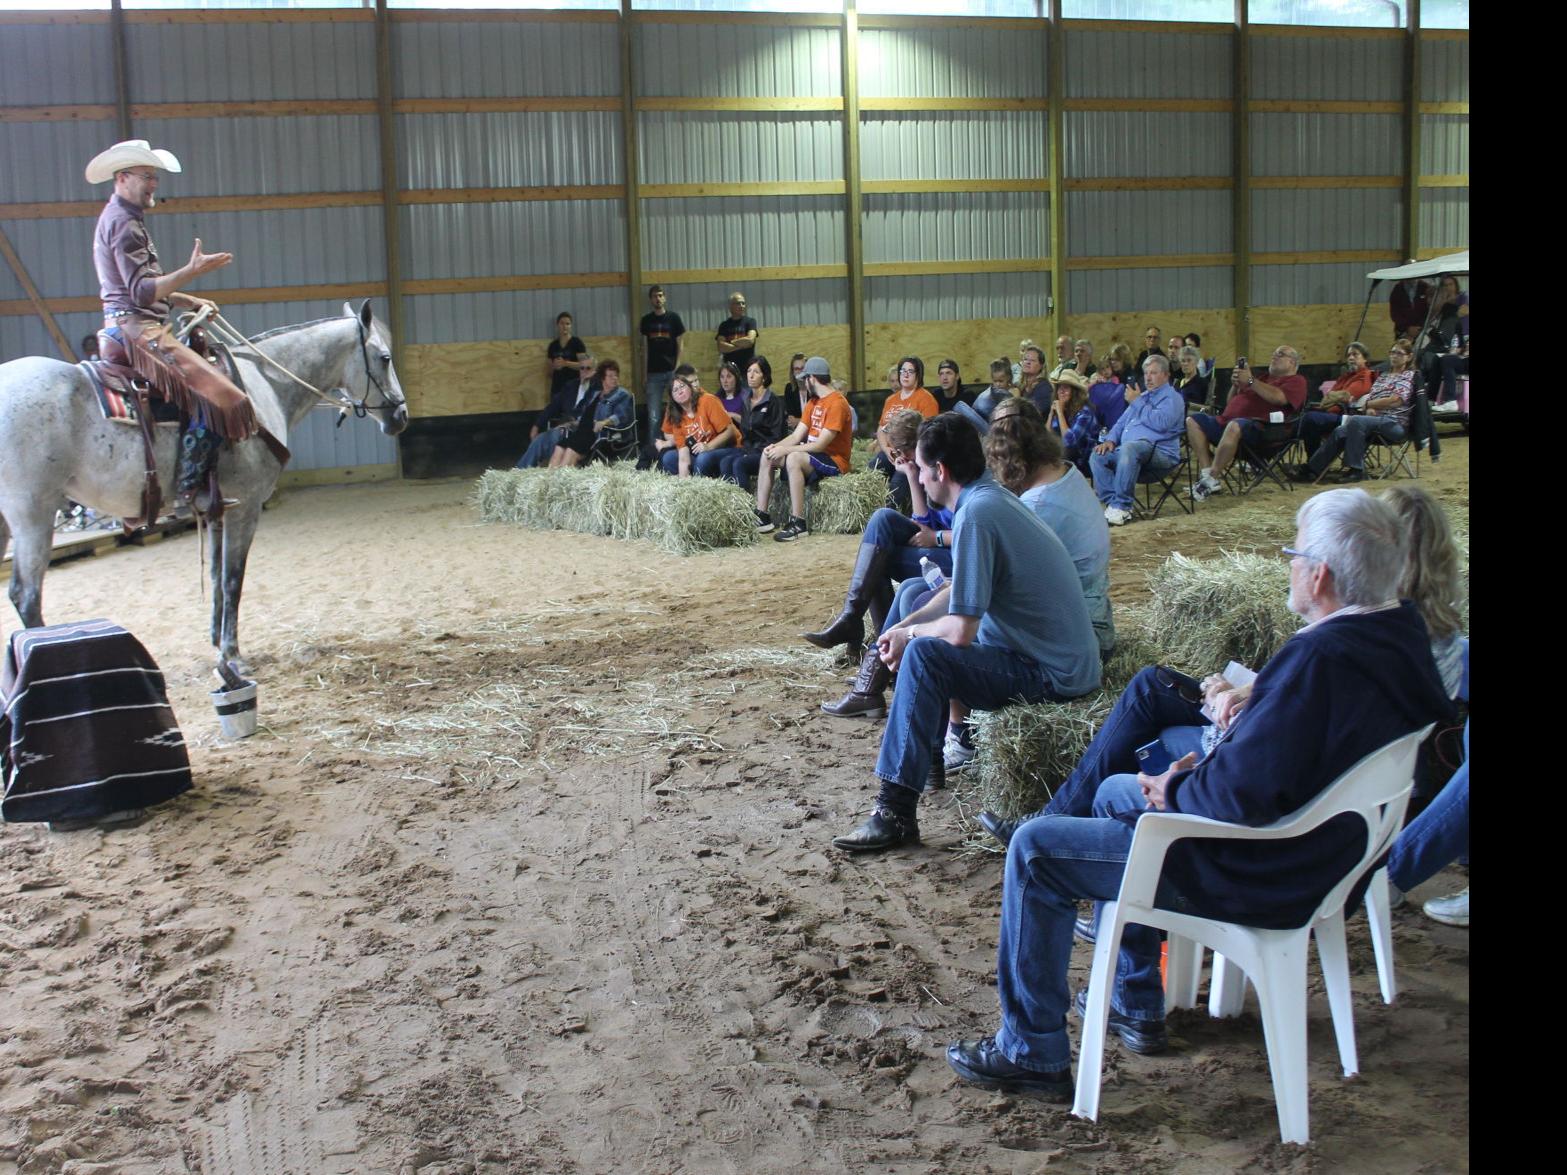 i aften Skov elskerinde True North Training Stables blesses its new riding barn, refurbished  welcome center with cowboy church | Porter County News | nwitimes.com